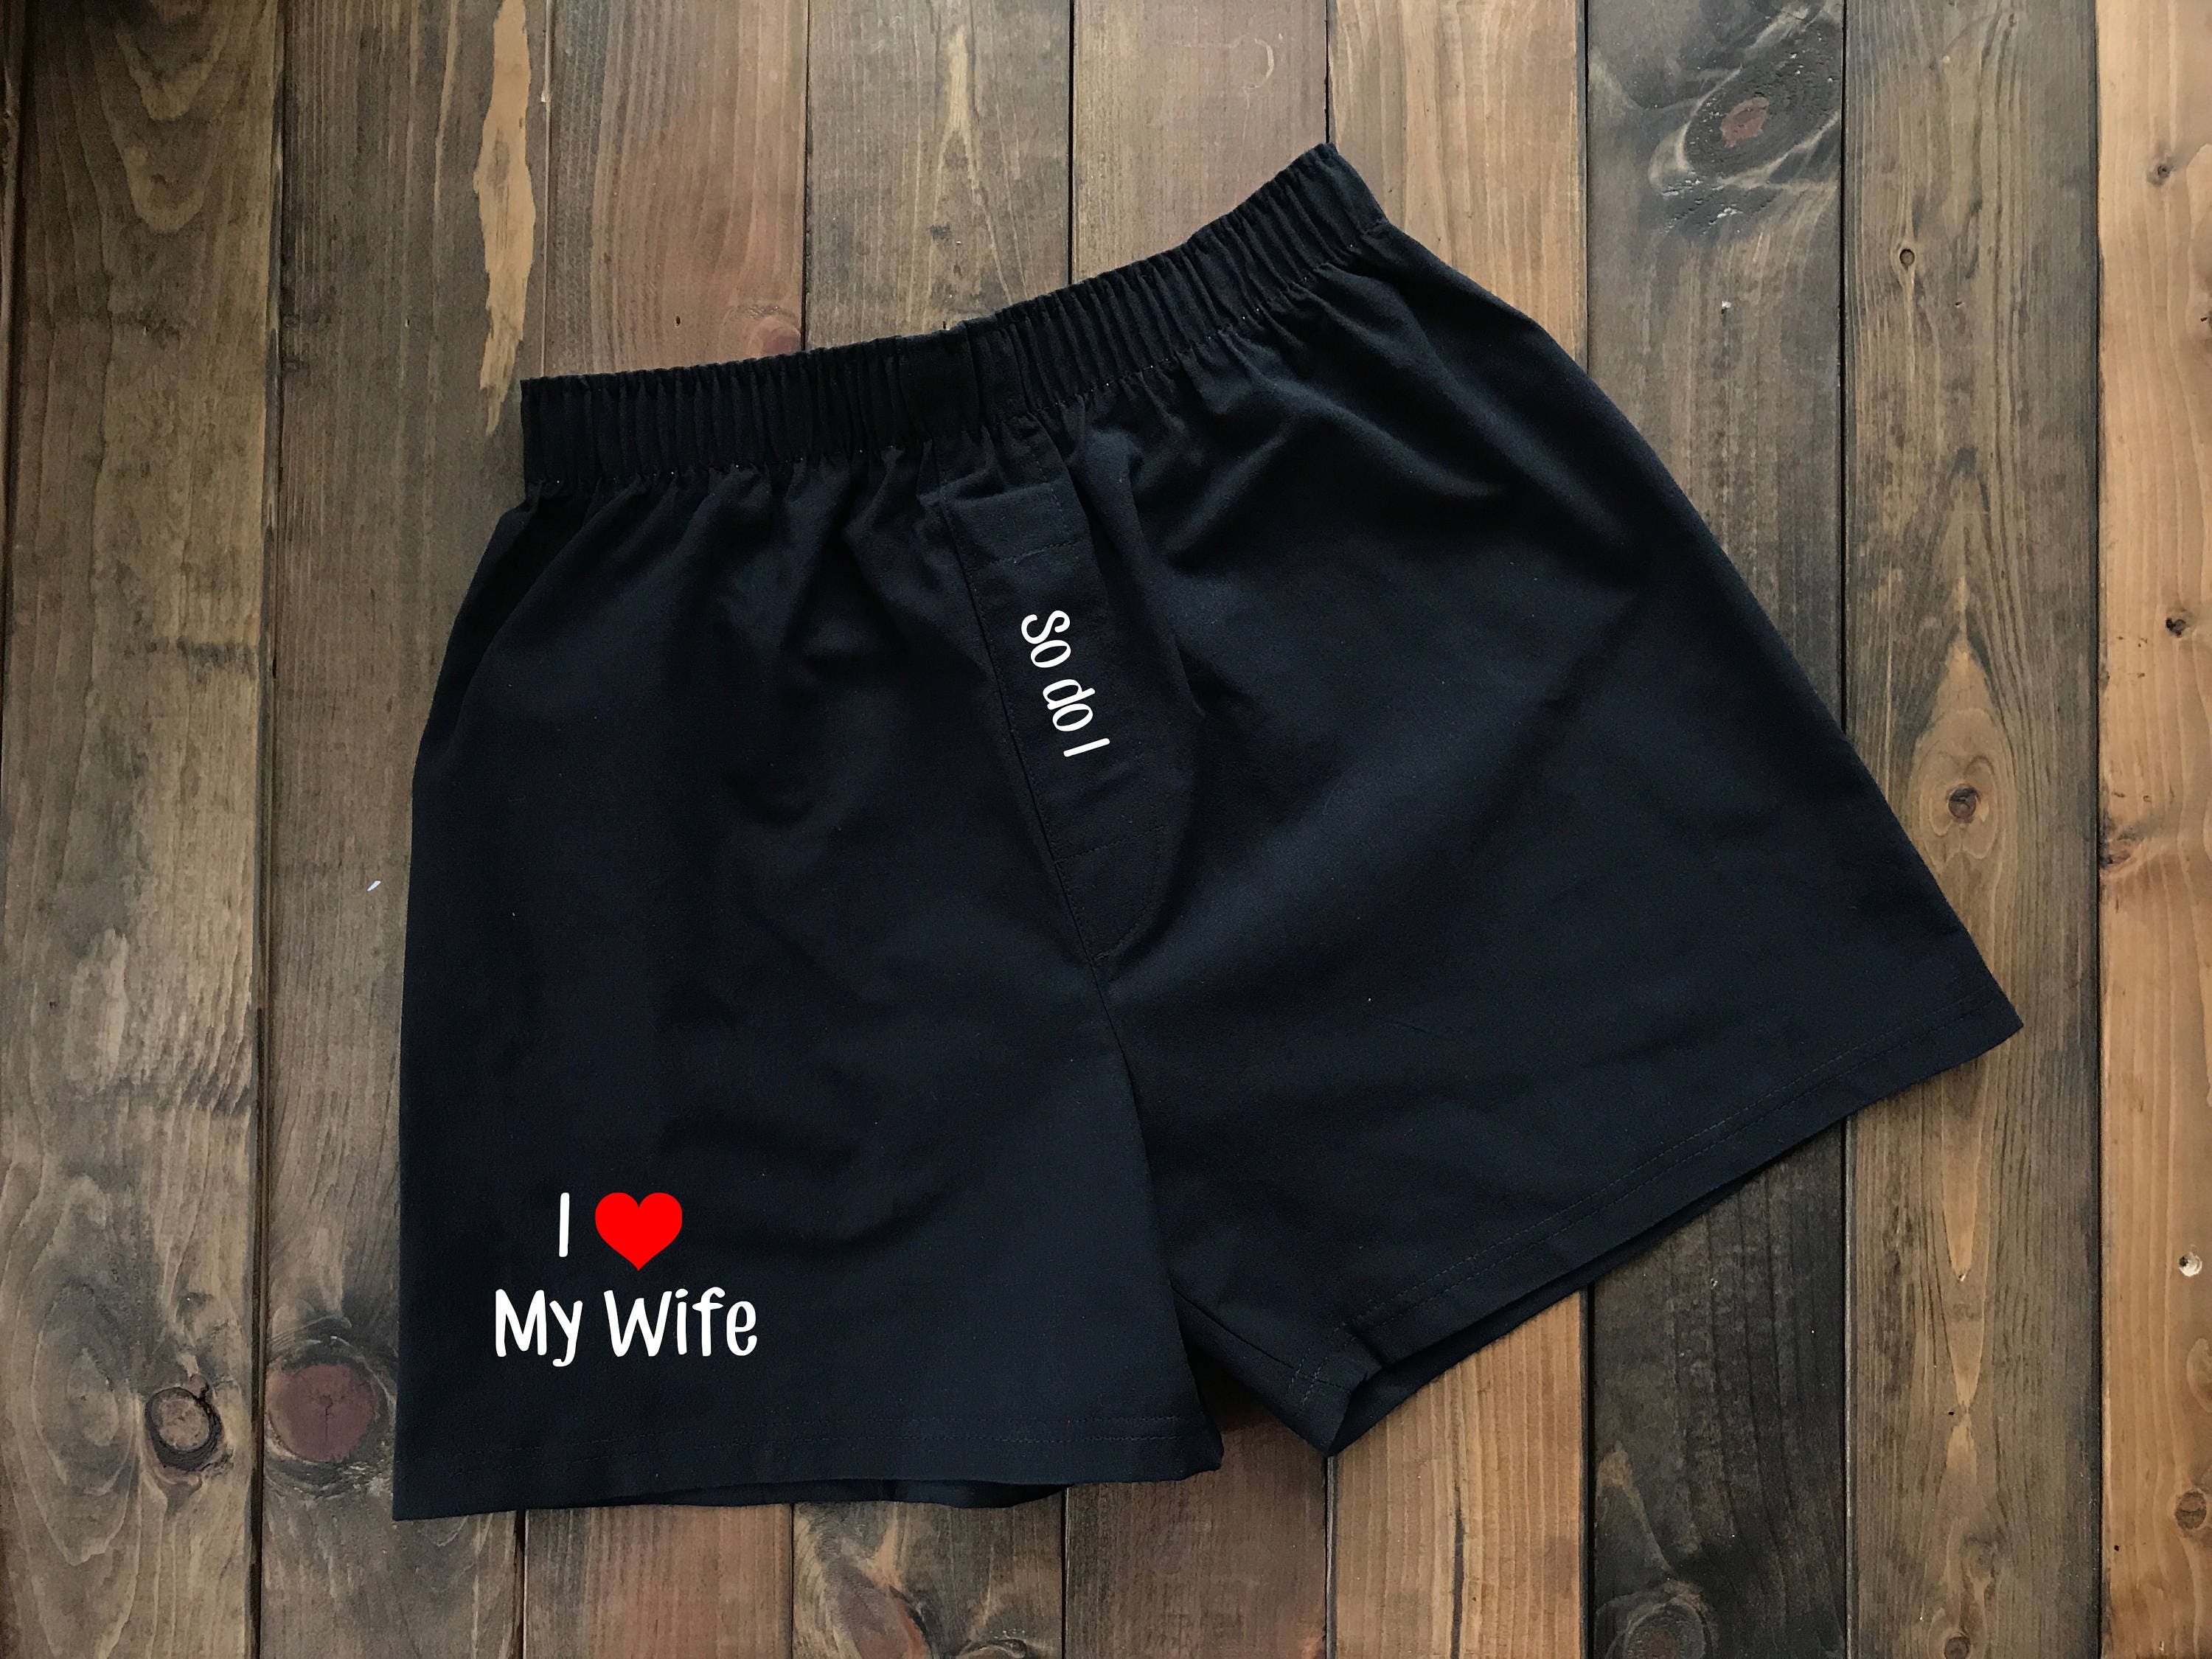 I Love My Wife Boxers Property of Boxers Funny Boxers Men's